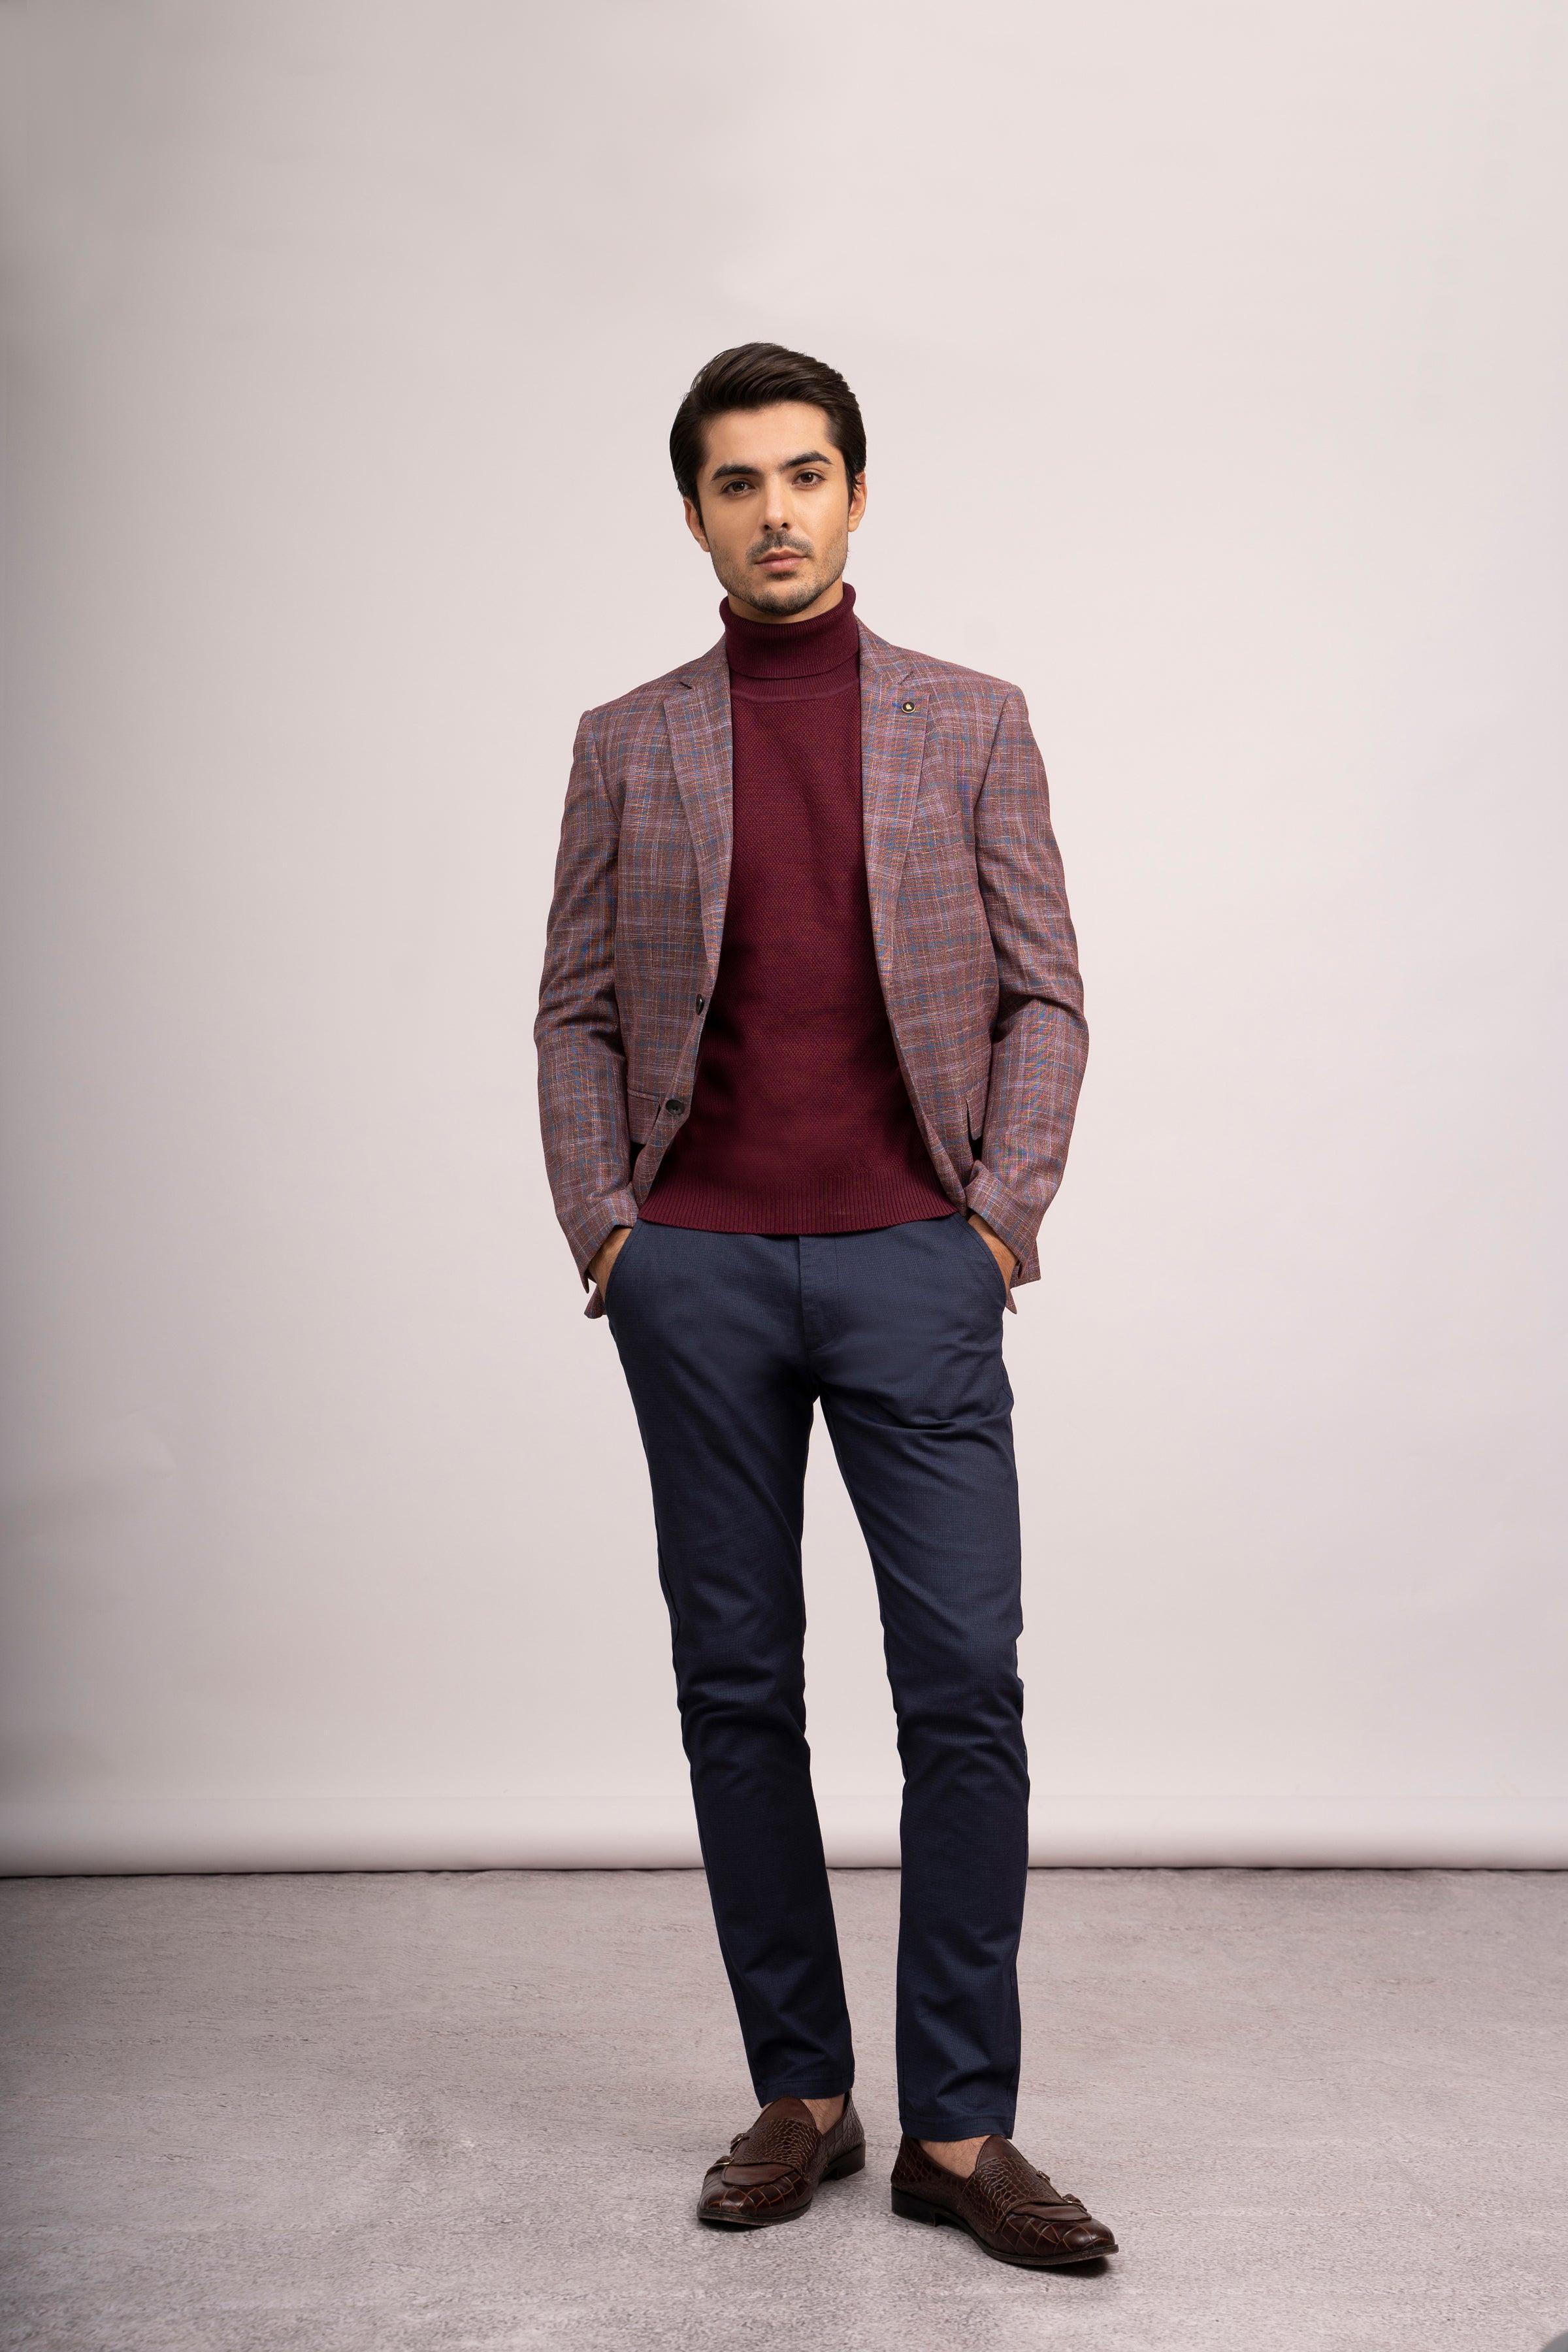 CASUAL COAT SLIM FIT MAROON at Charcoal Clothing